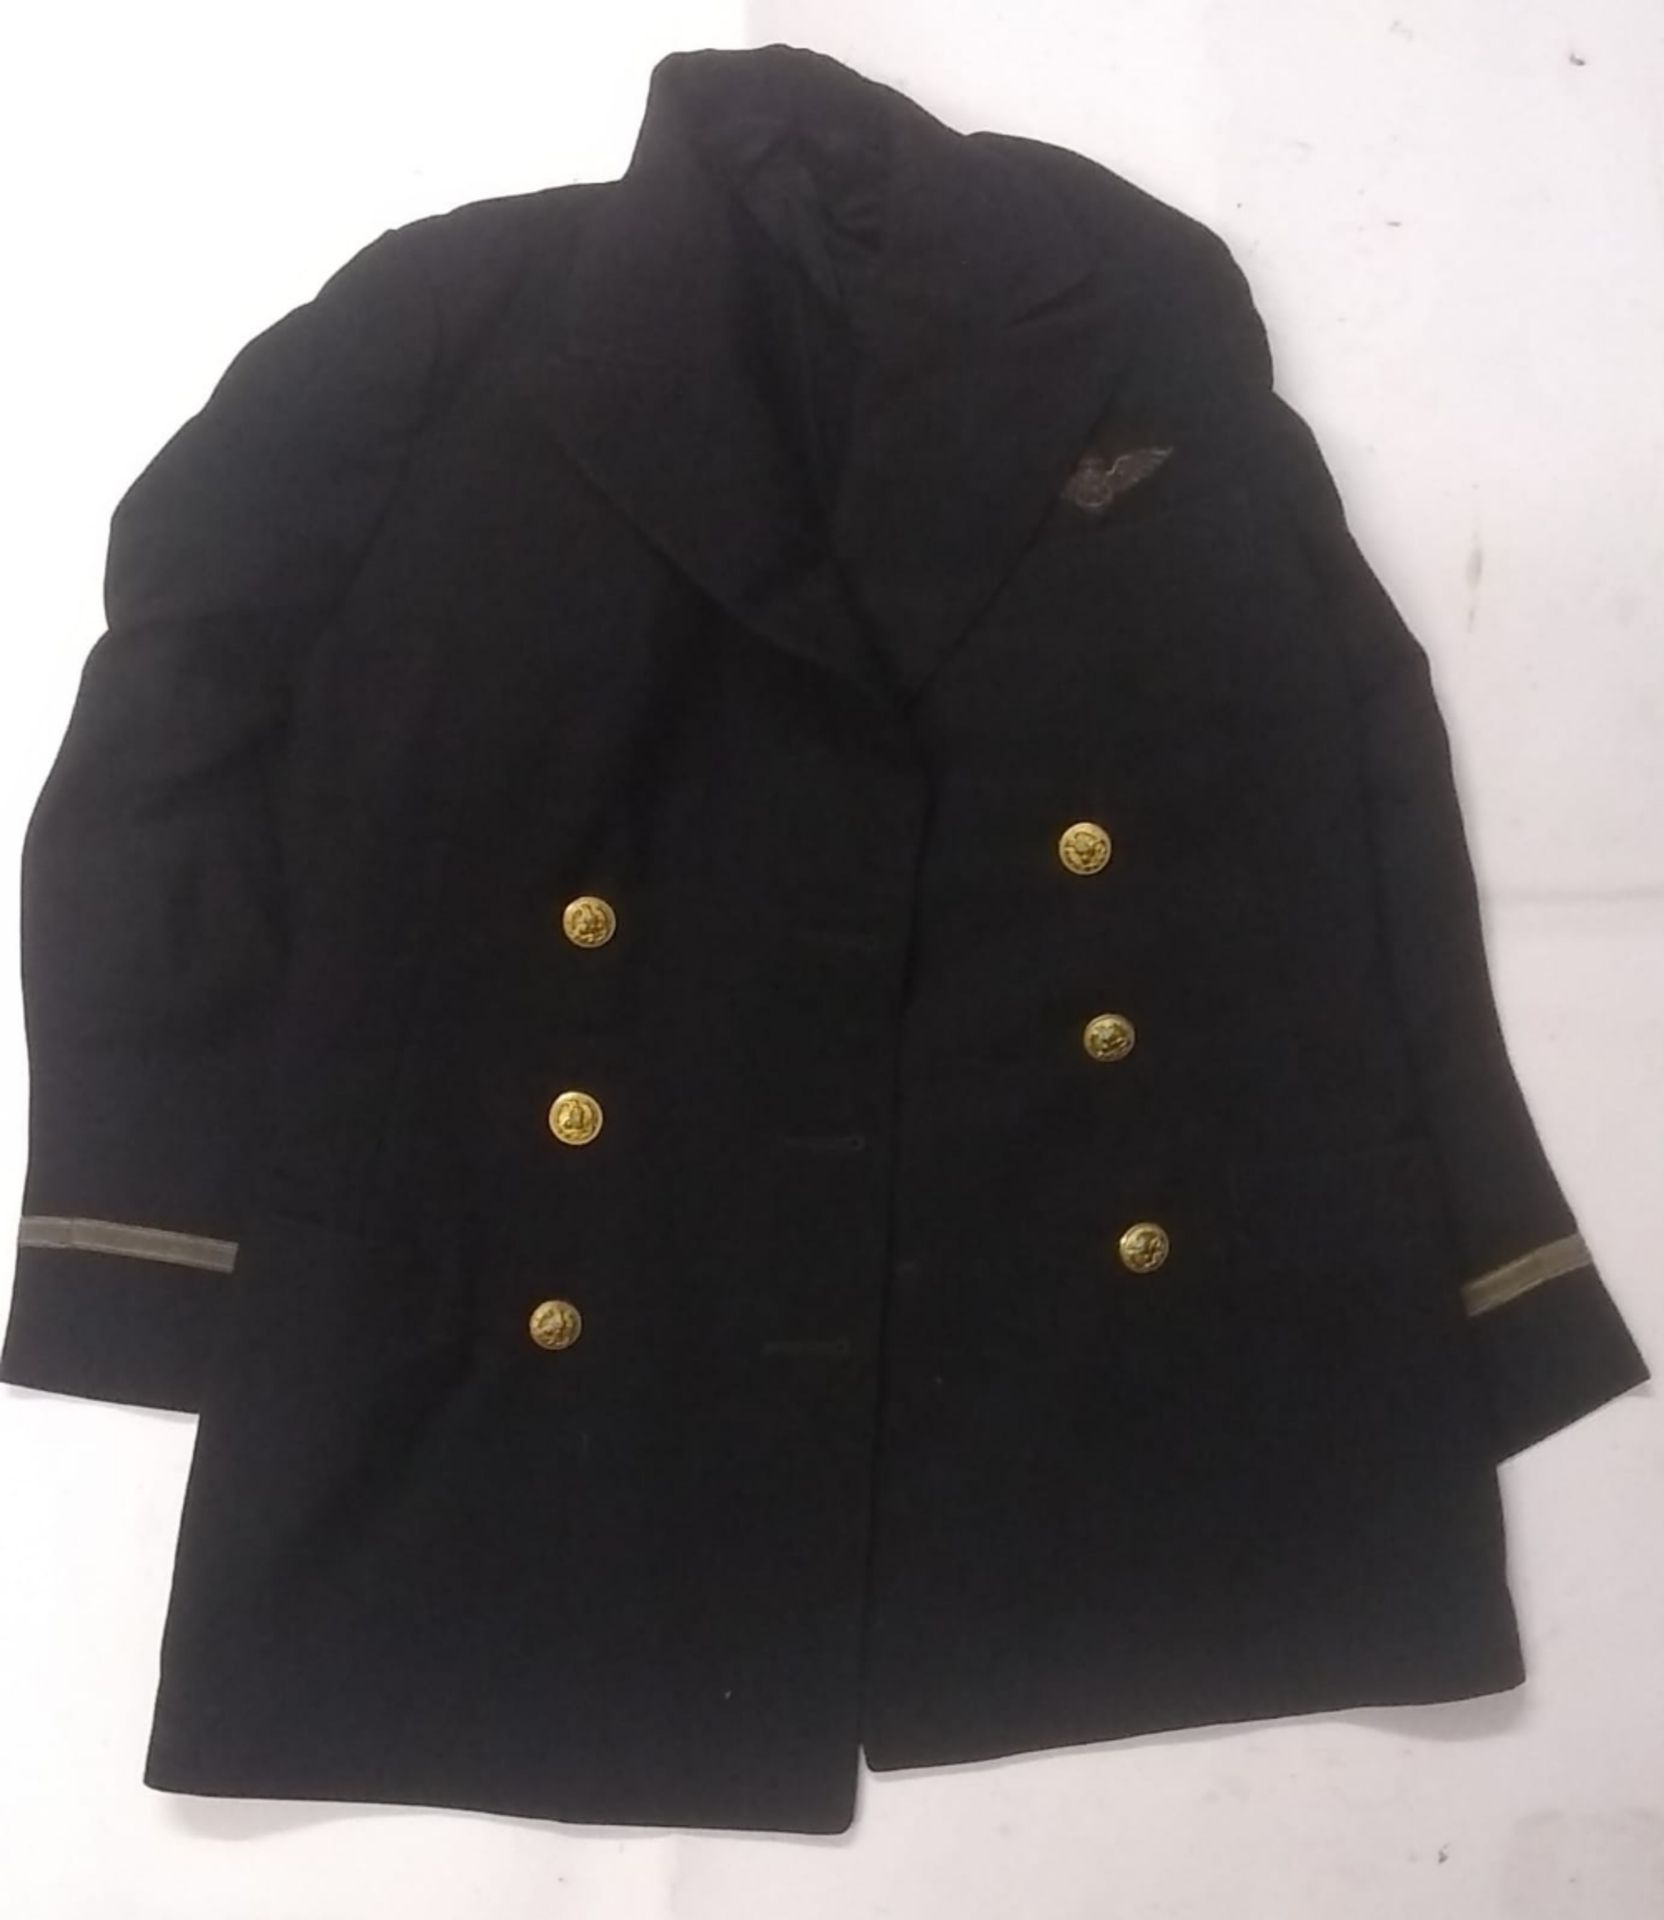 A WWII US Navy jacket.